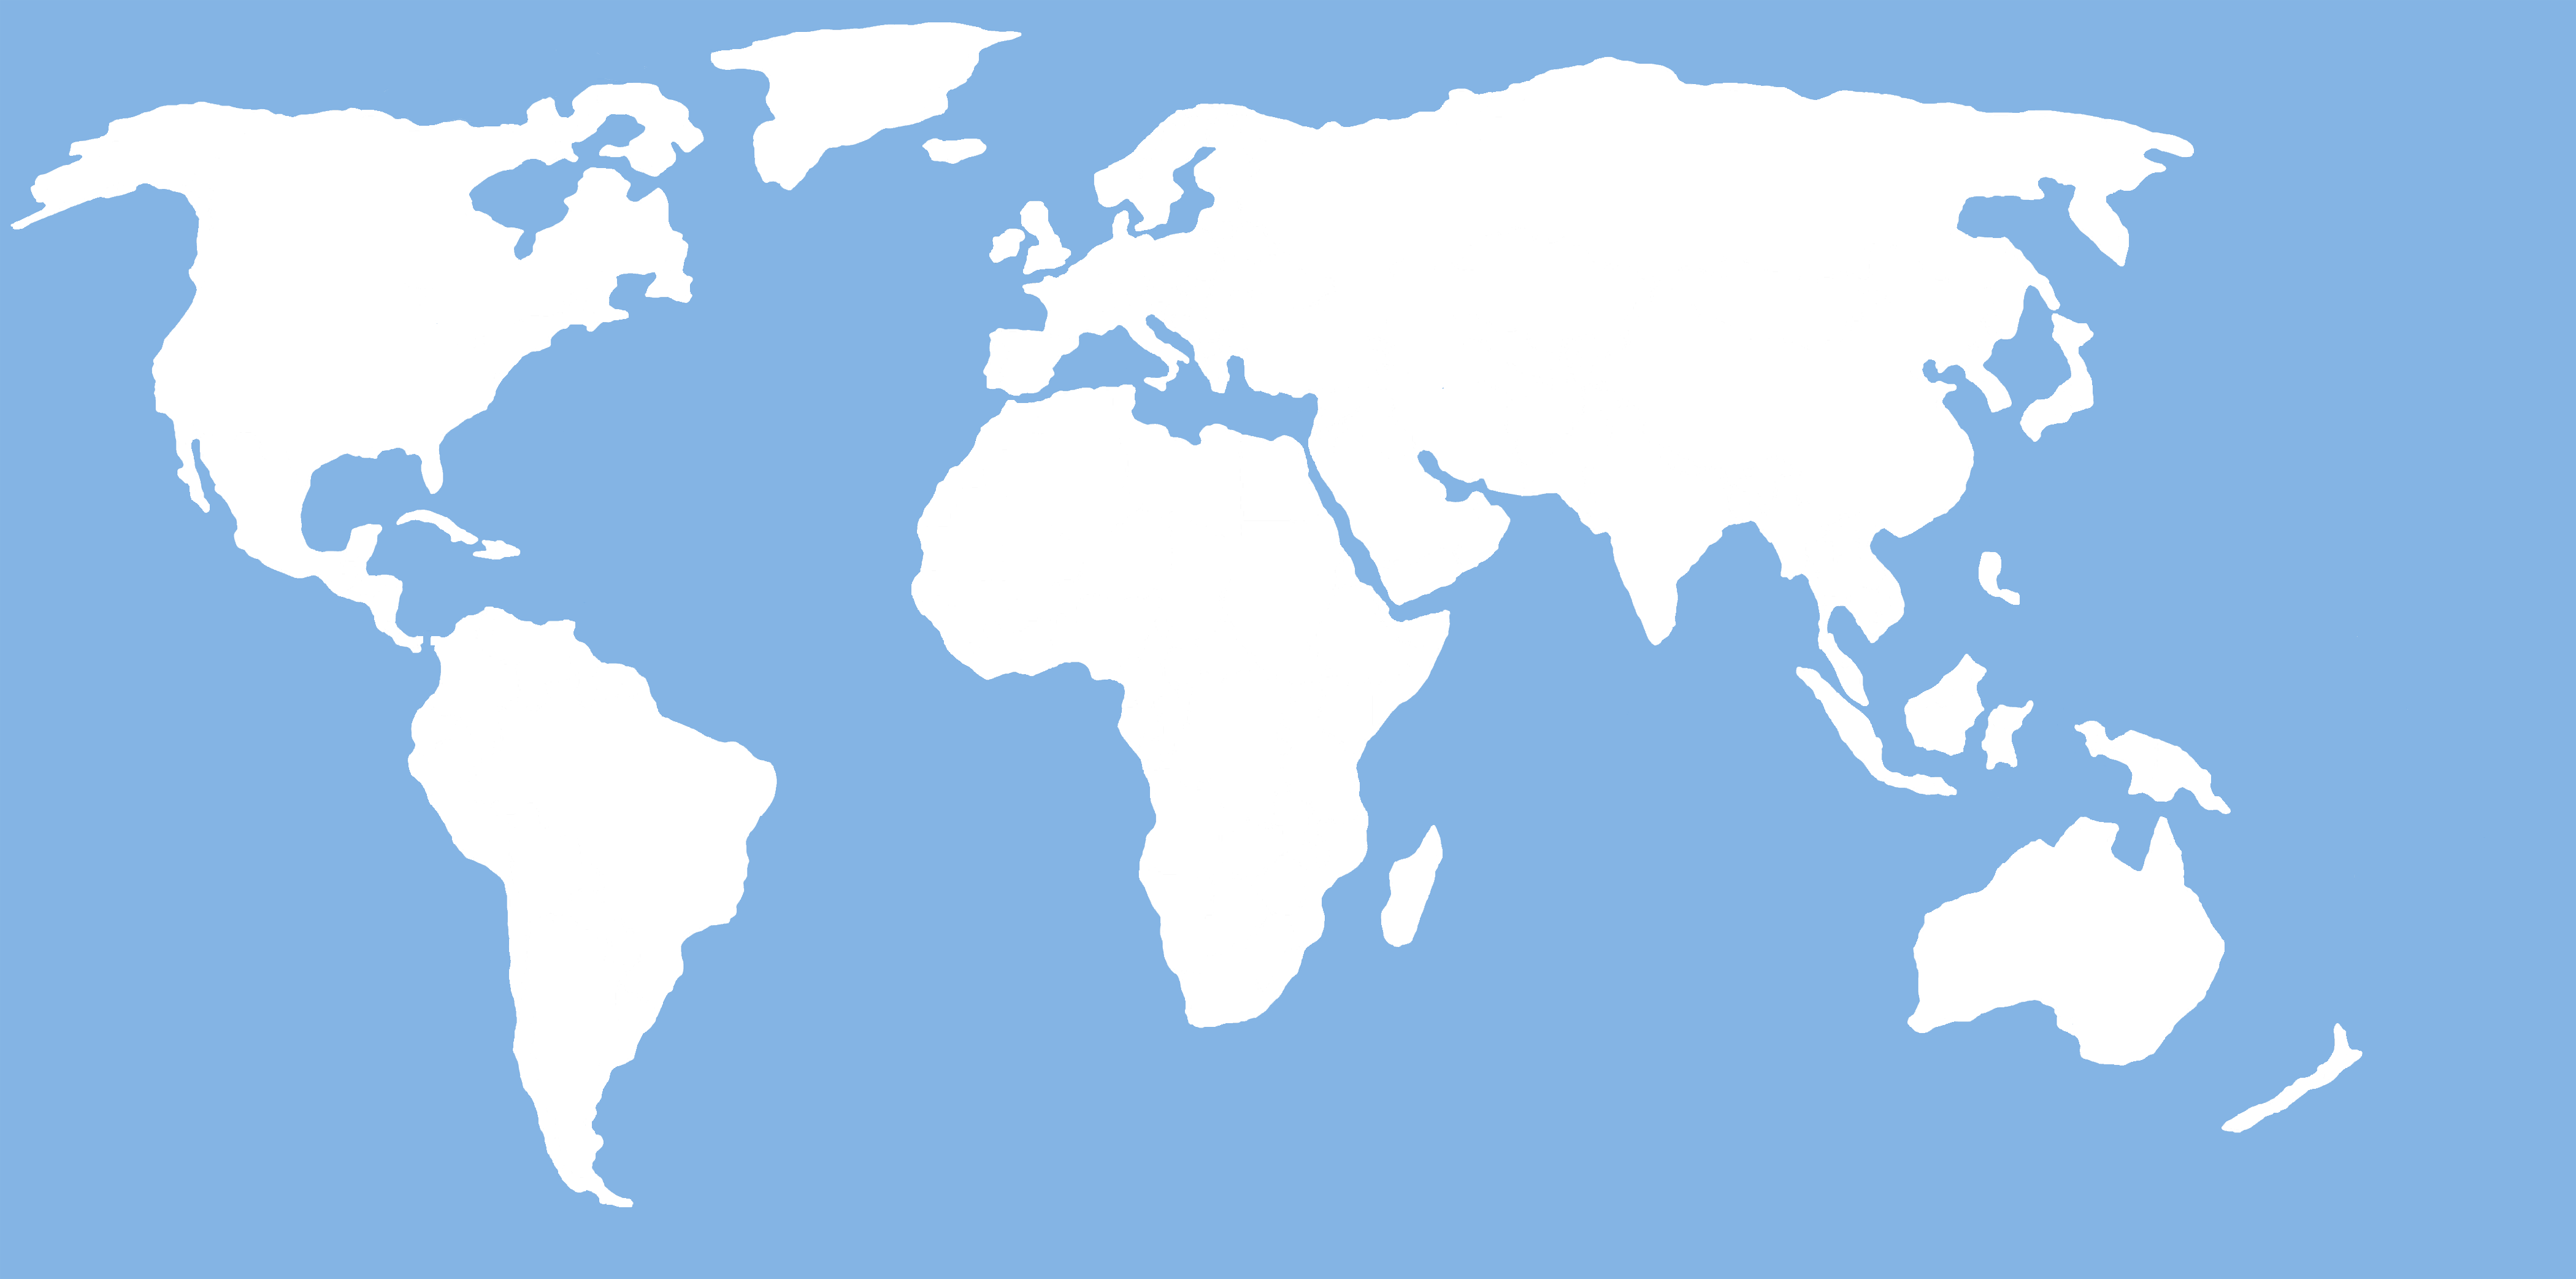 World Map For Wall Free Images At Clker Com Vector Clip Art Online